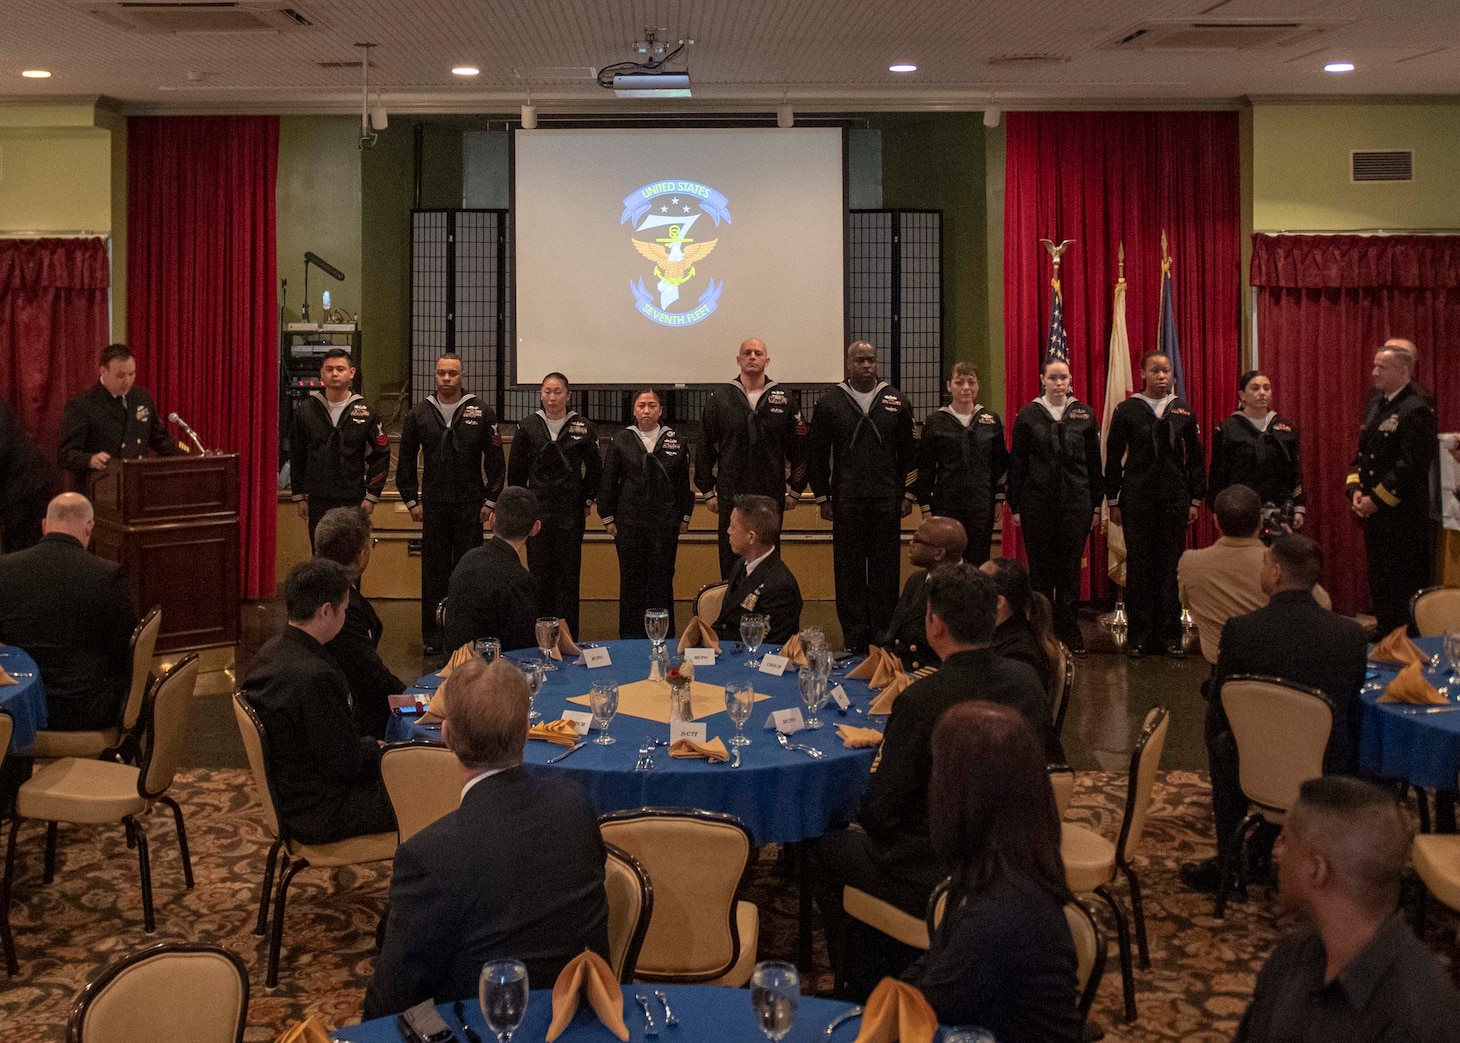 YOKOSUKA, Japan (Jan. 23, 2020) Finalists for the U.S 7th fleet Sailor of the Year wait for the winners to be announced during a ceremony at Commander, Fleet Activities Yokosuka. The 7th Fleet Sailor of the Year Week is designed to share with these outstanding Sailors the unique operational environment in the 7th Fleet as well as enhance regional partnerships with like-minded forces.